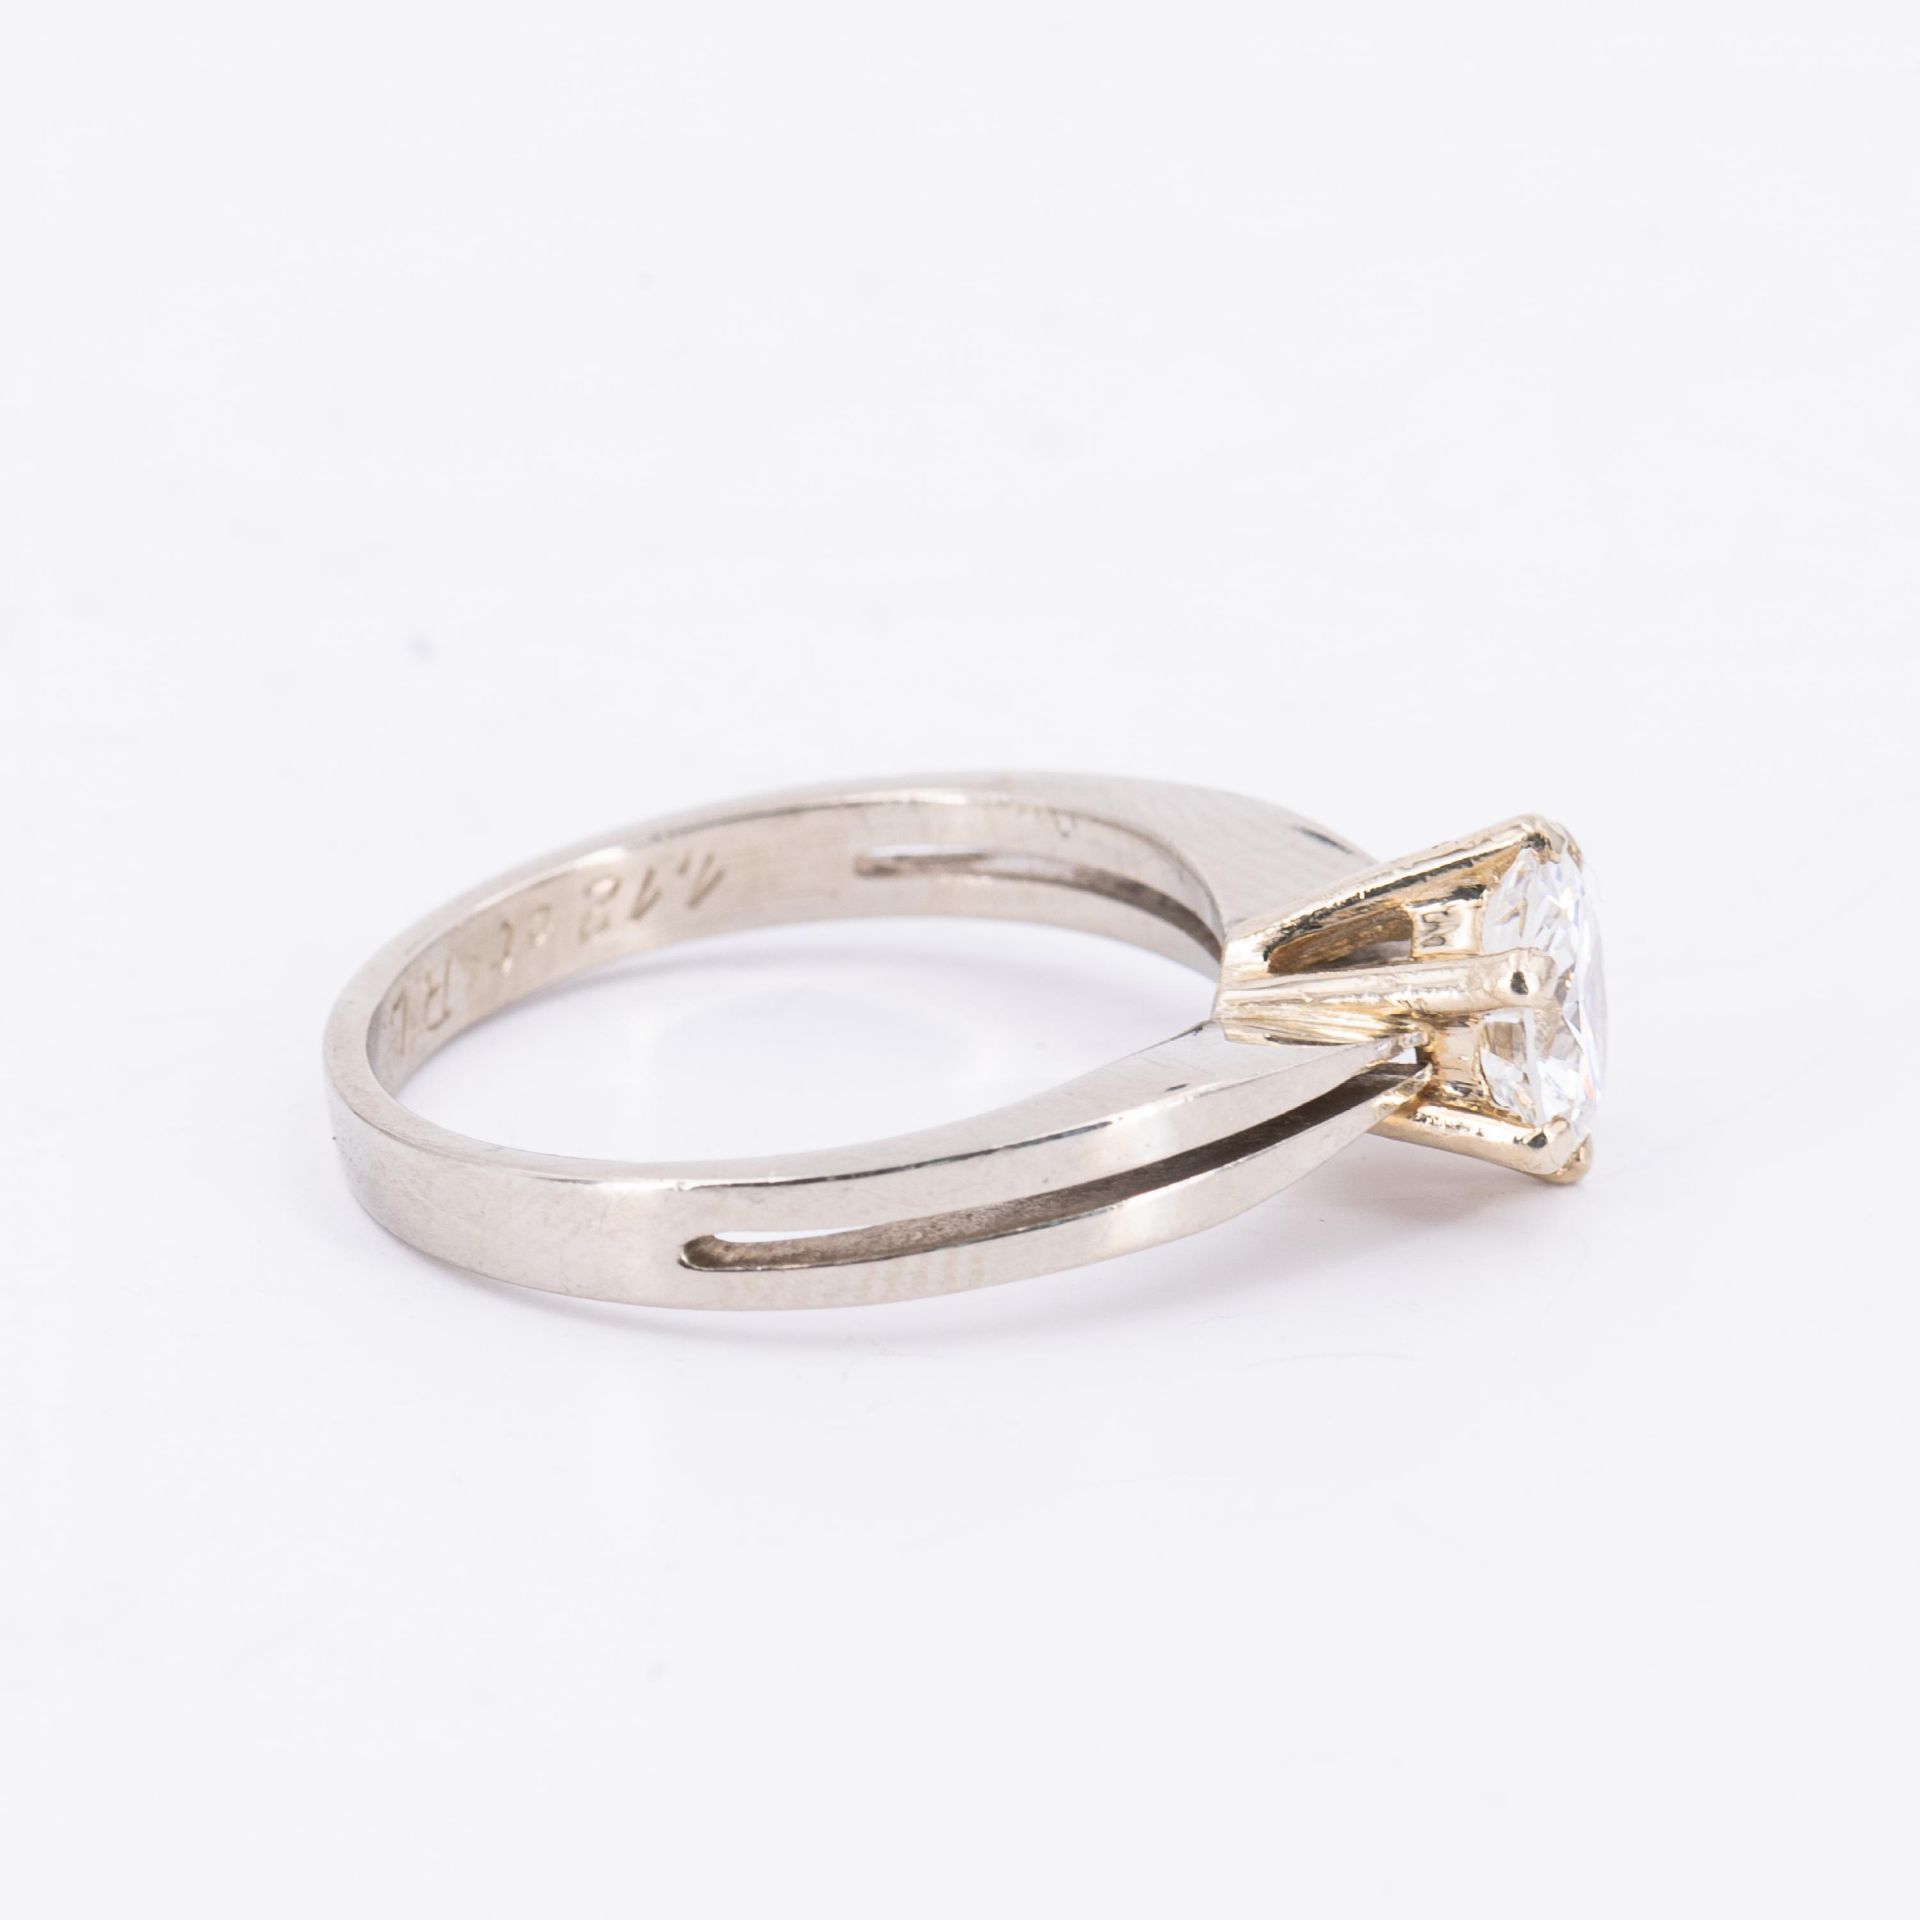 Solitaire-Ring - Image 2 of 4